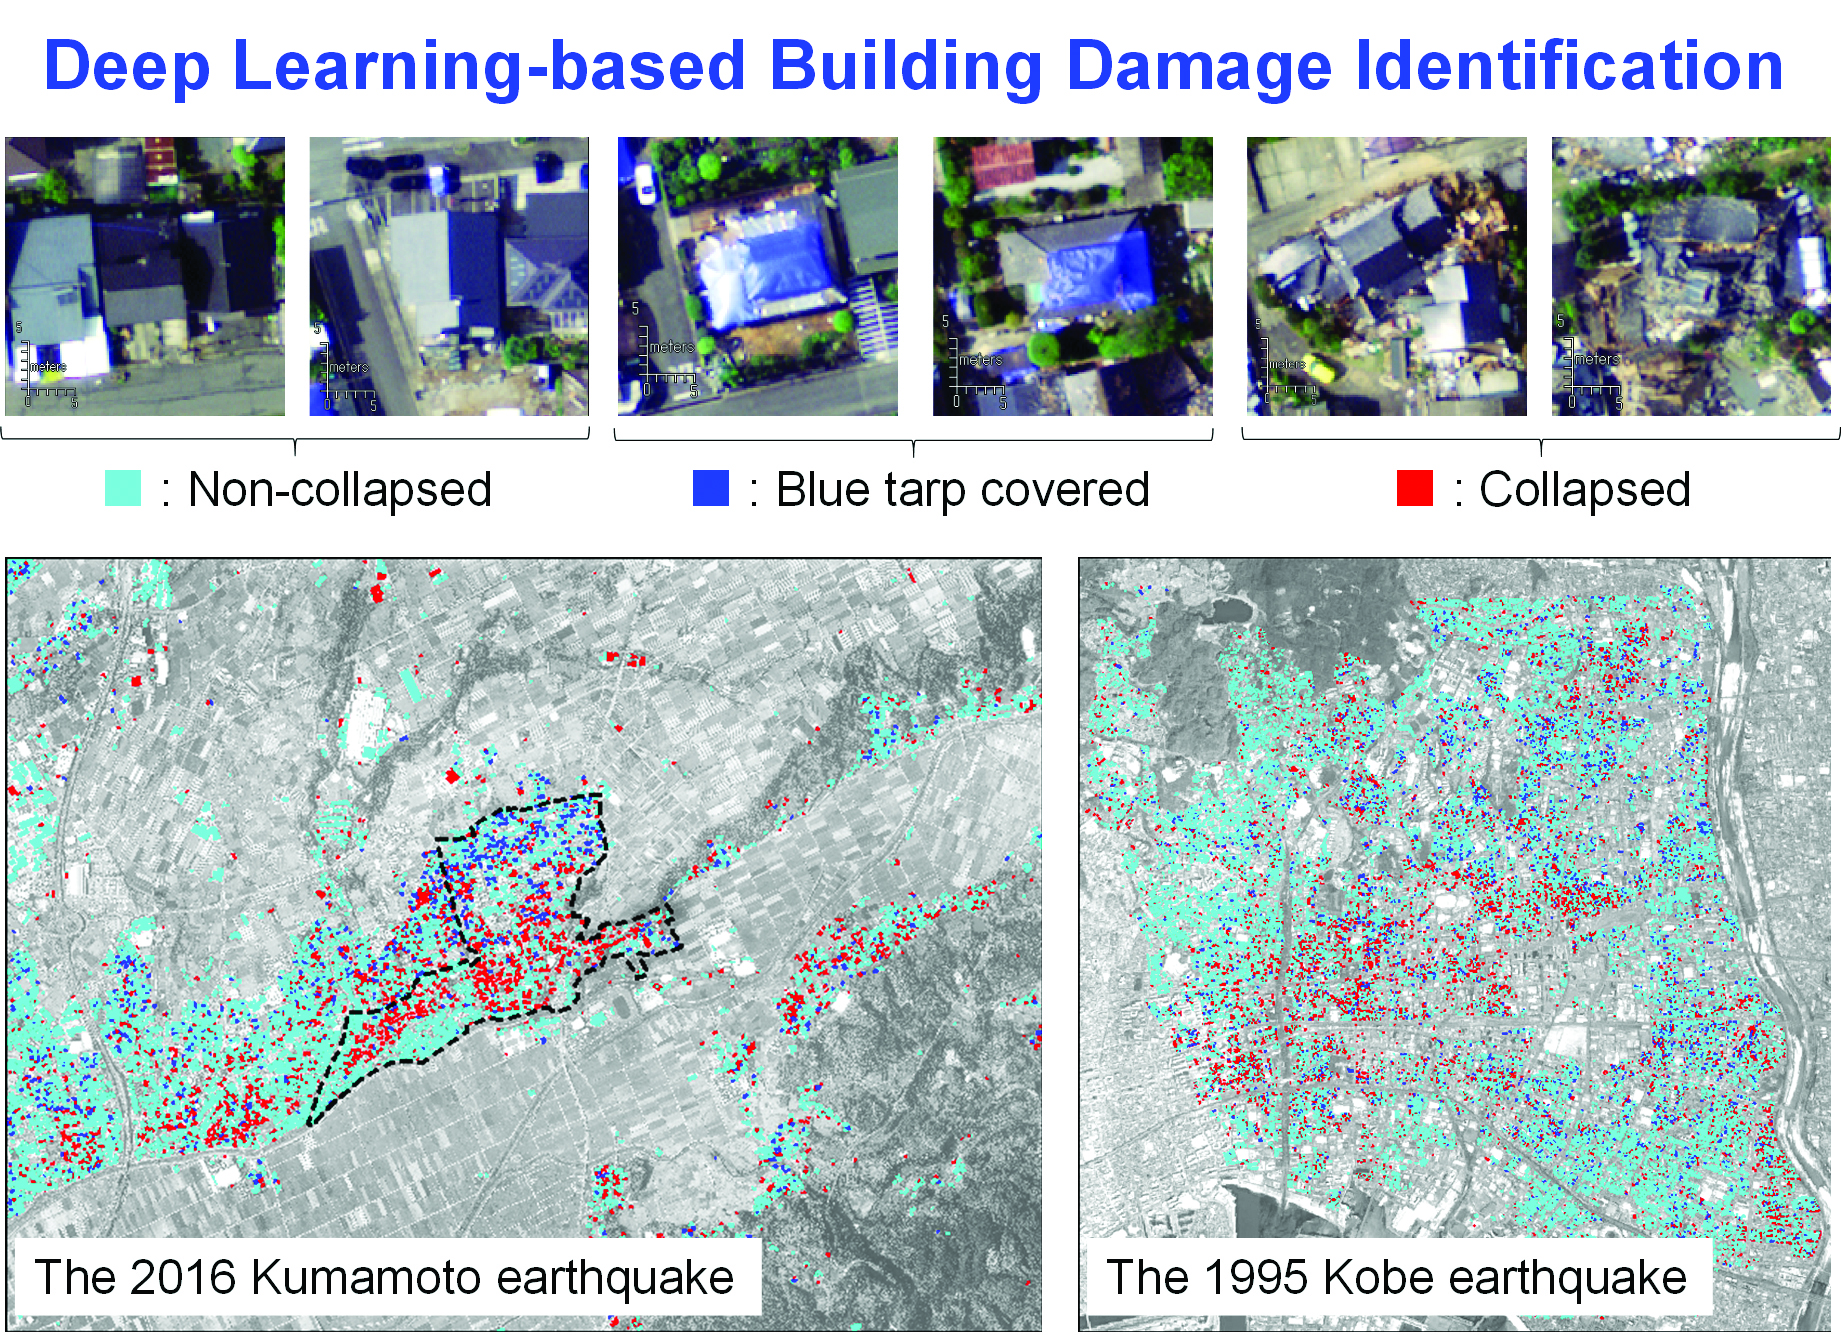 computer model map depicting deep learning based building damage identification. buildings are categorized as non collapsed, blue tarp covered, and collapsed by aqua, blue, and red dots respectively